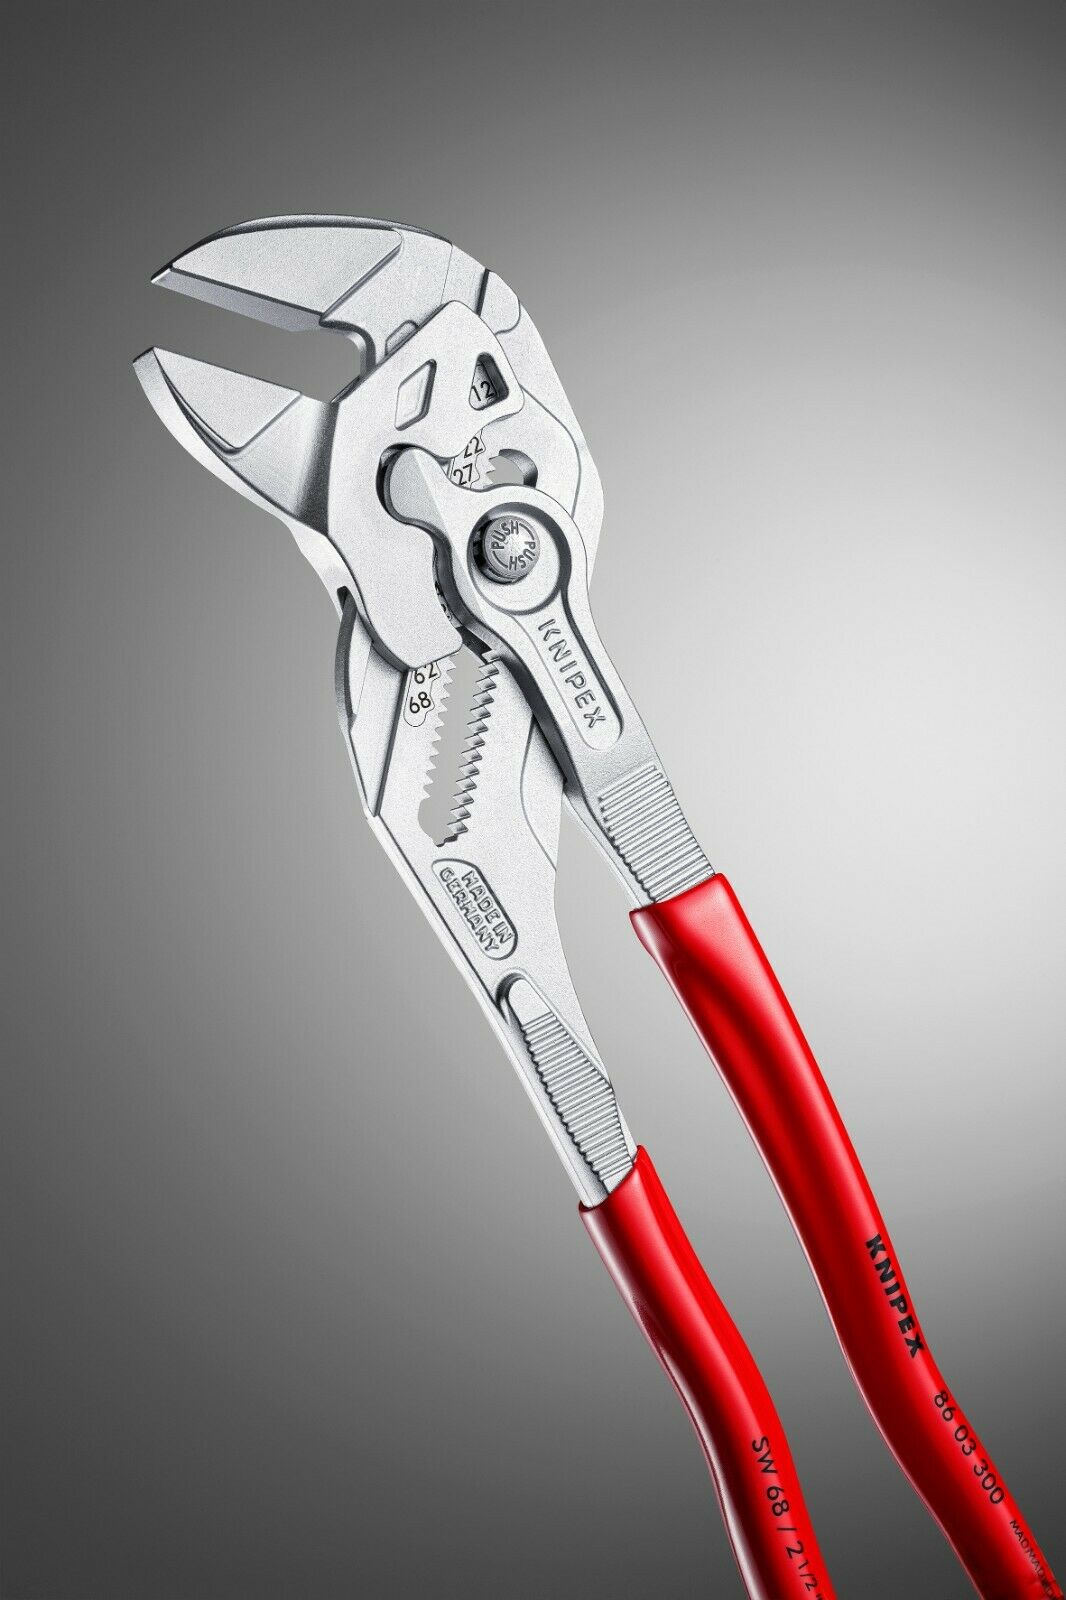 5 PLIERS WRENCH